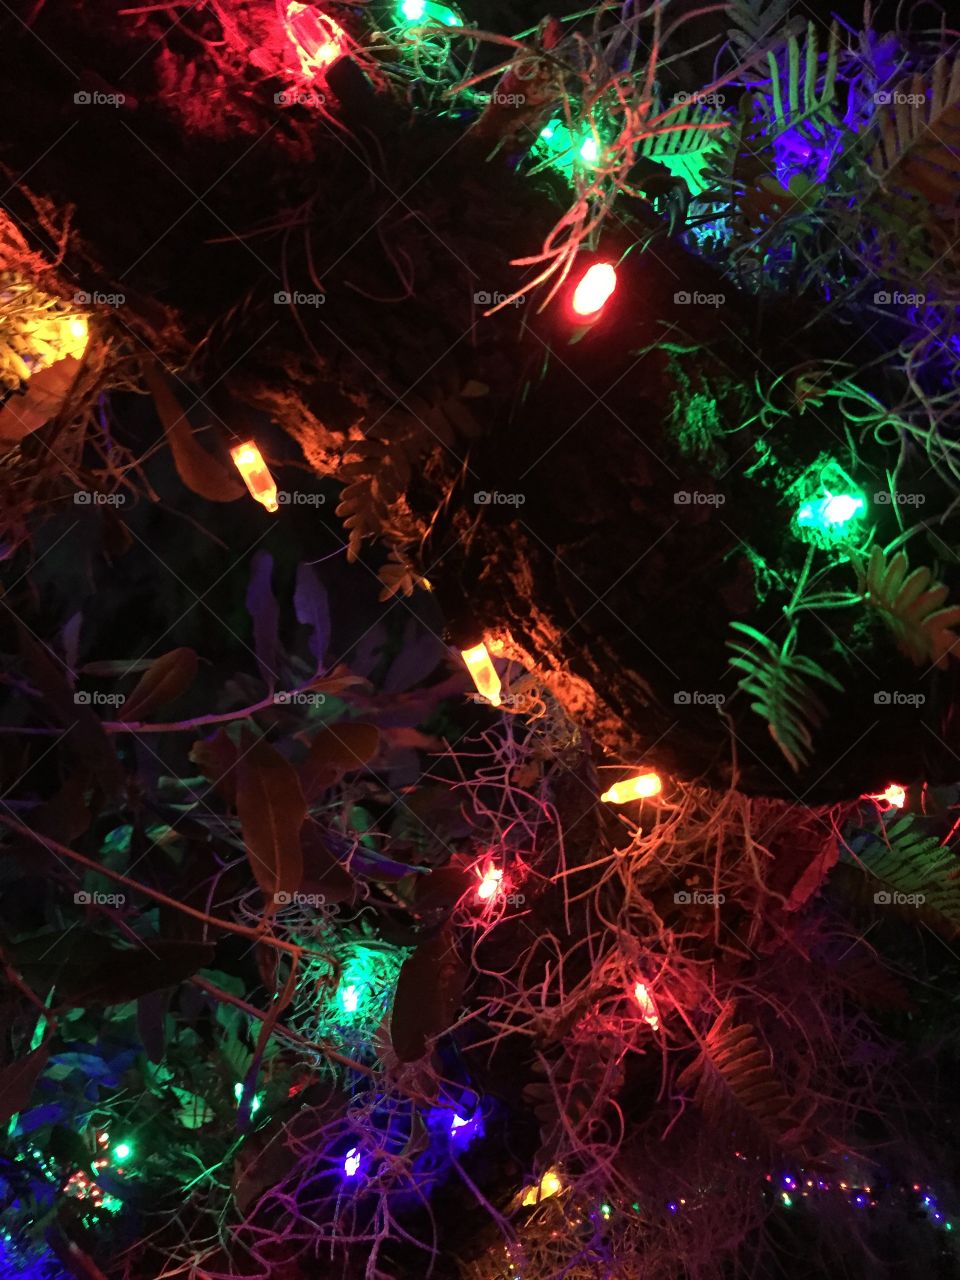 Shot of multicolored Christmas lights to represent the festivities of Christmas and its lovely joy!